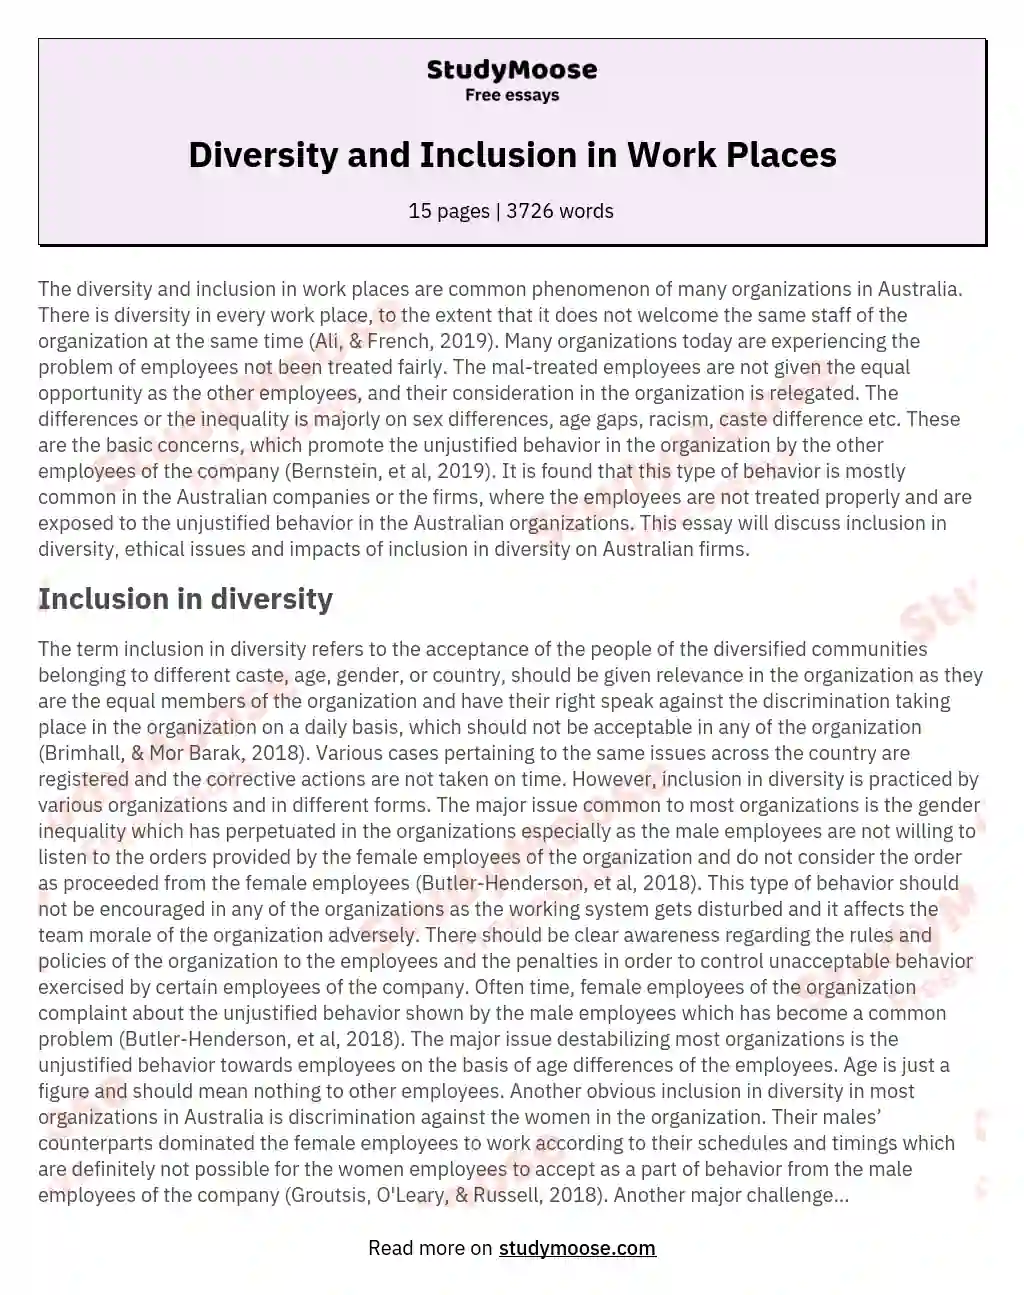 Diversity and Inclusion in Work Places essay